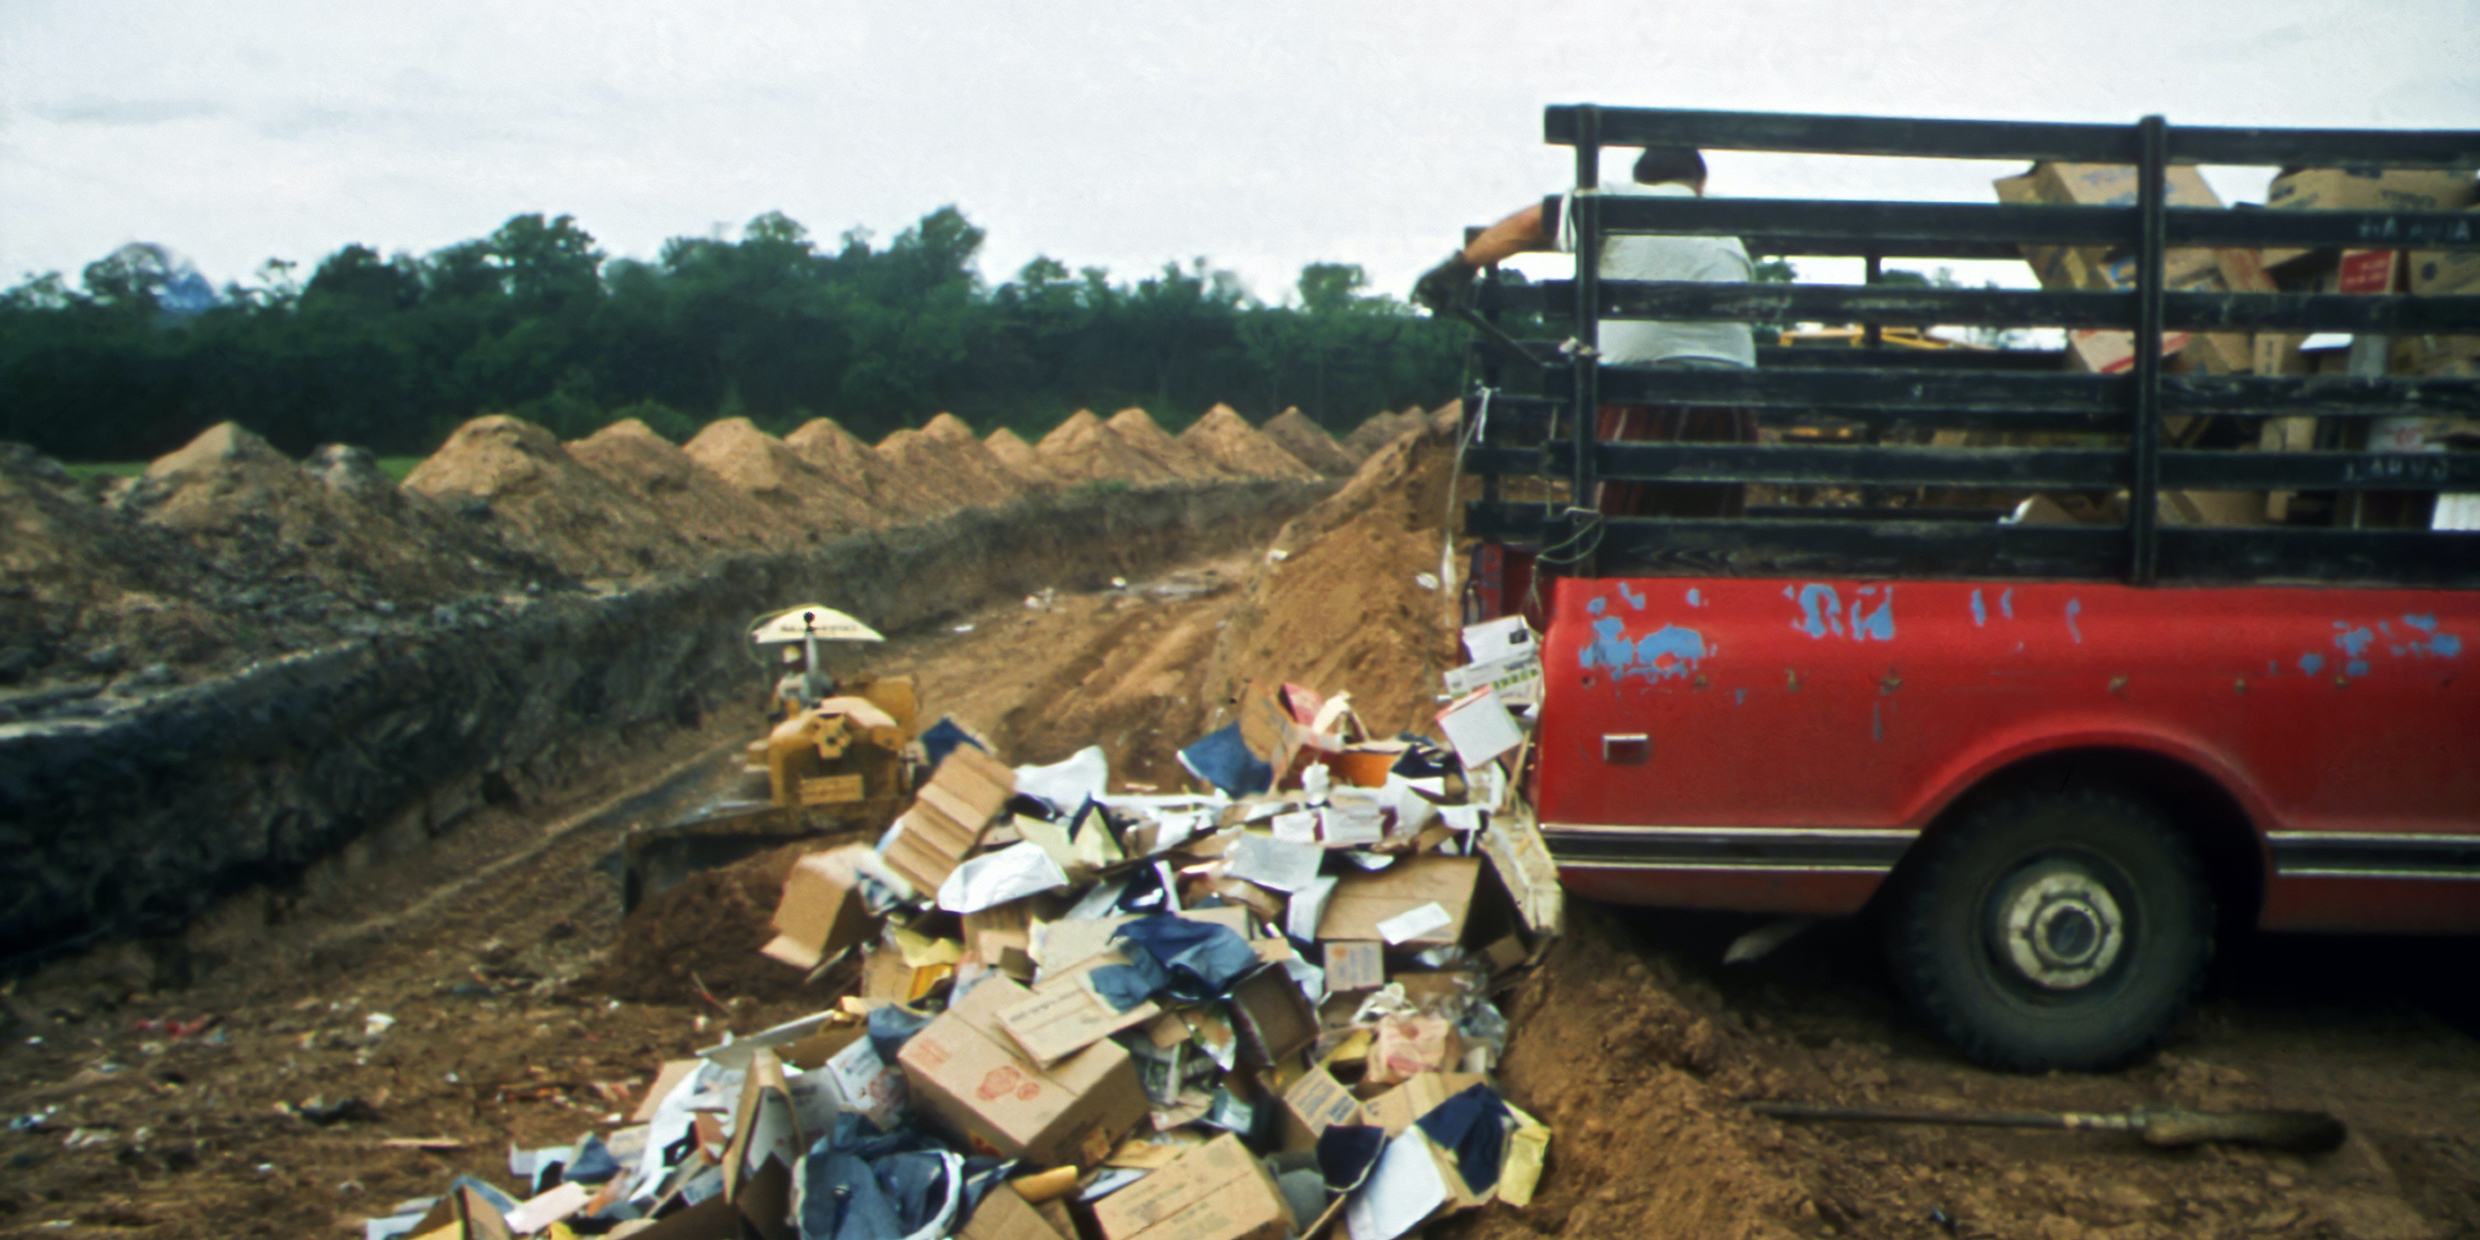 Image of a man unloading garbage from a pickup truck into a landfill